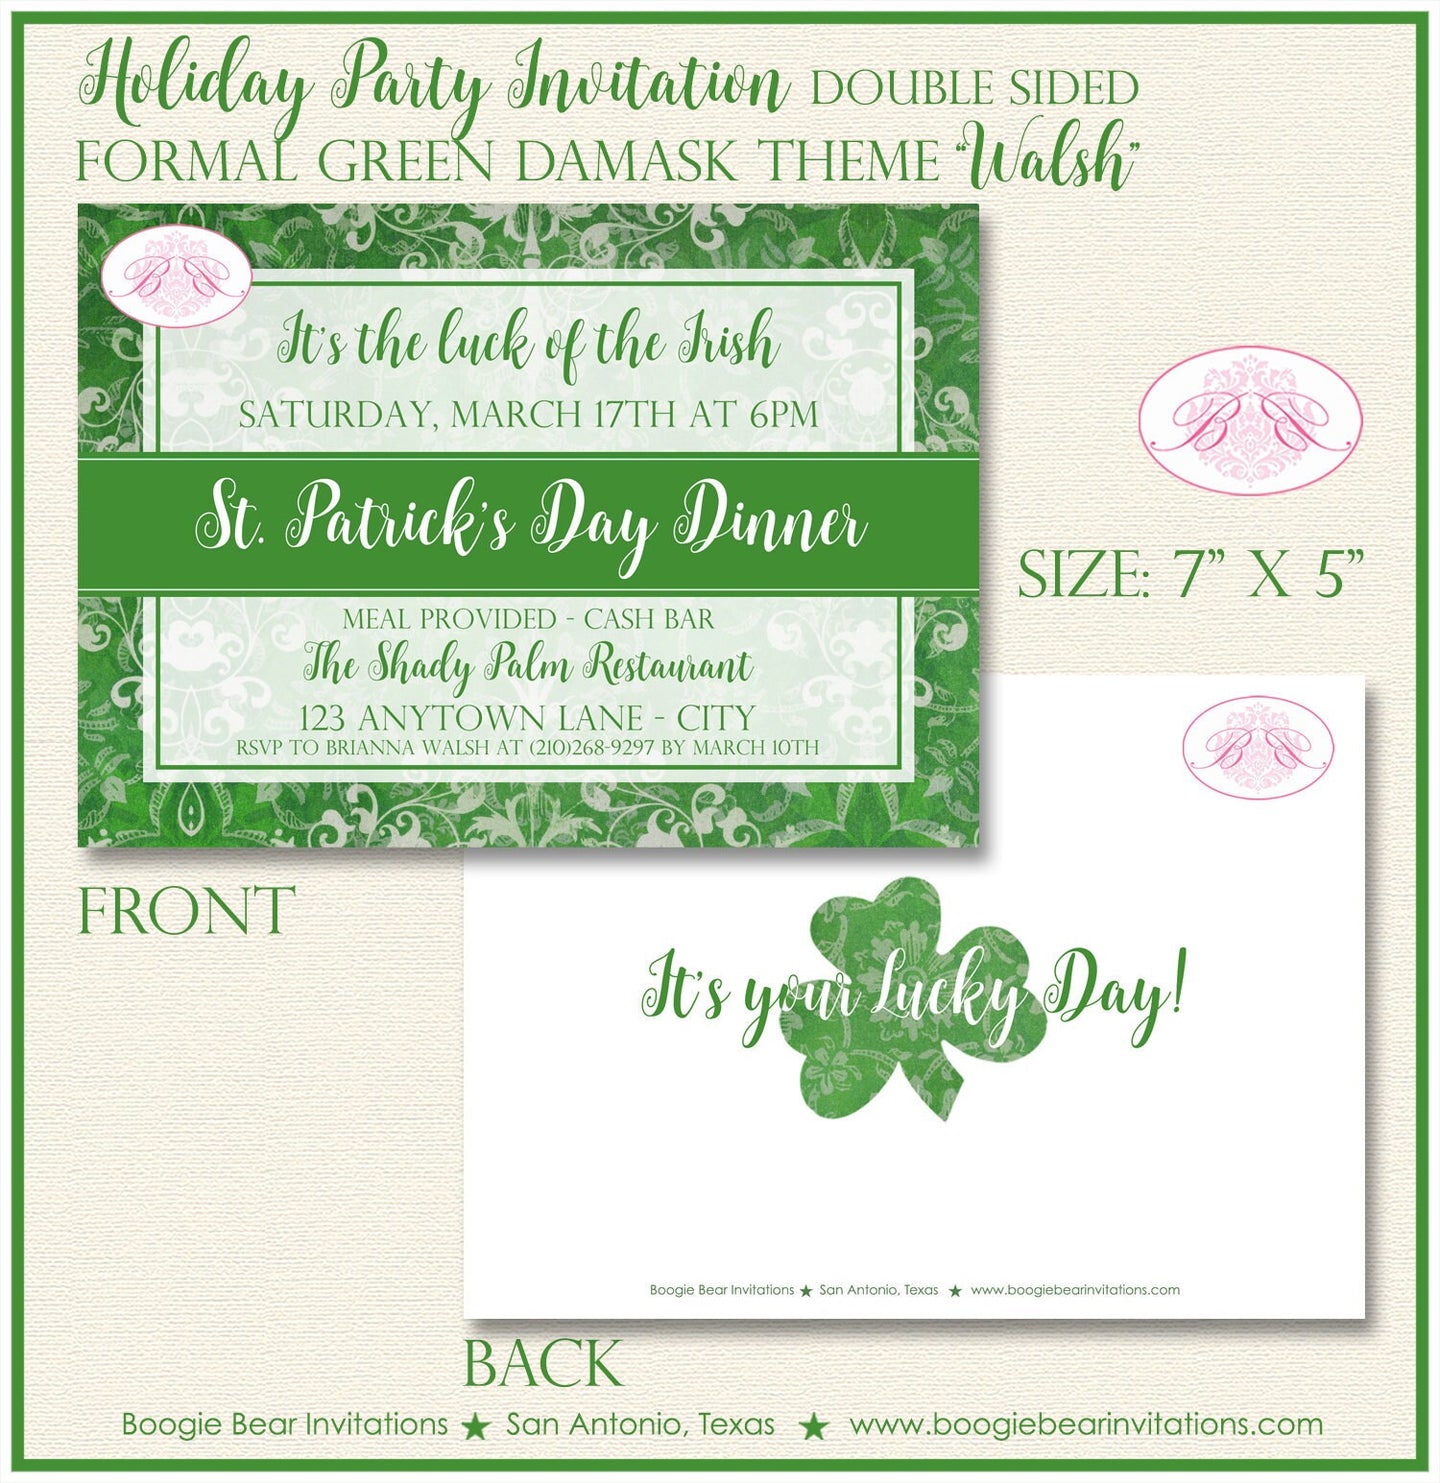 St. Patrick's Day Party Invitation Irish Green Lucky Formal Damask Holiday Boogie Bear Invitations Walsh Theme Paperless Printable Printed